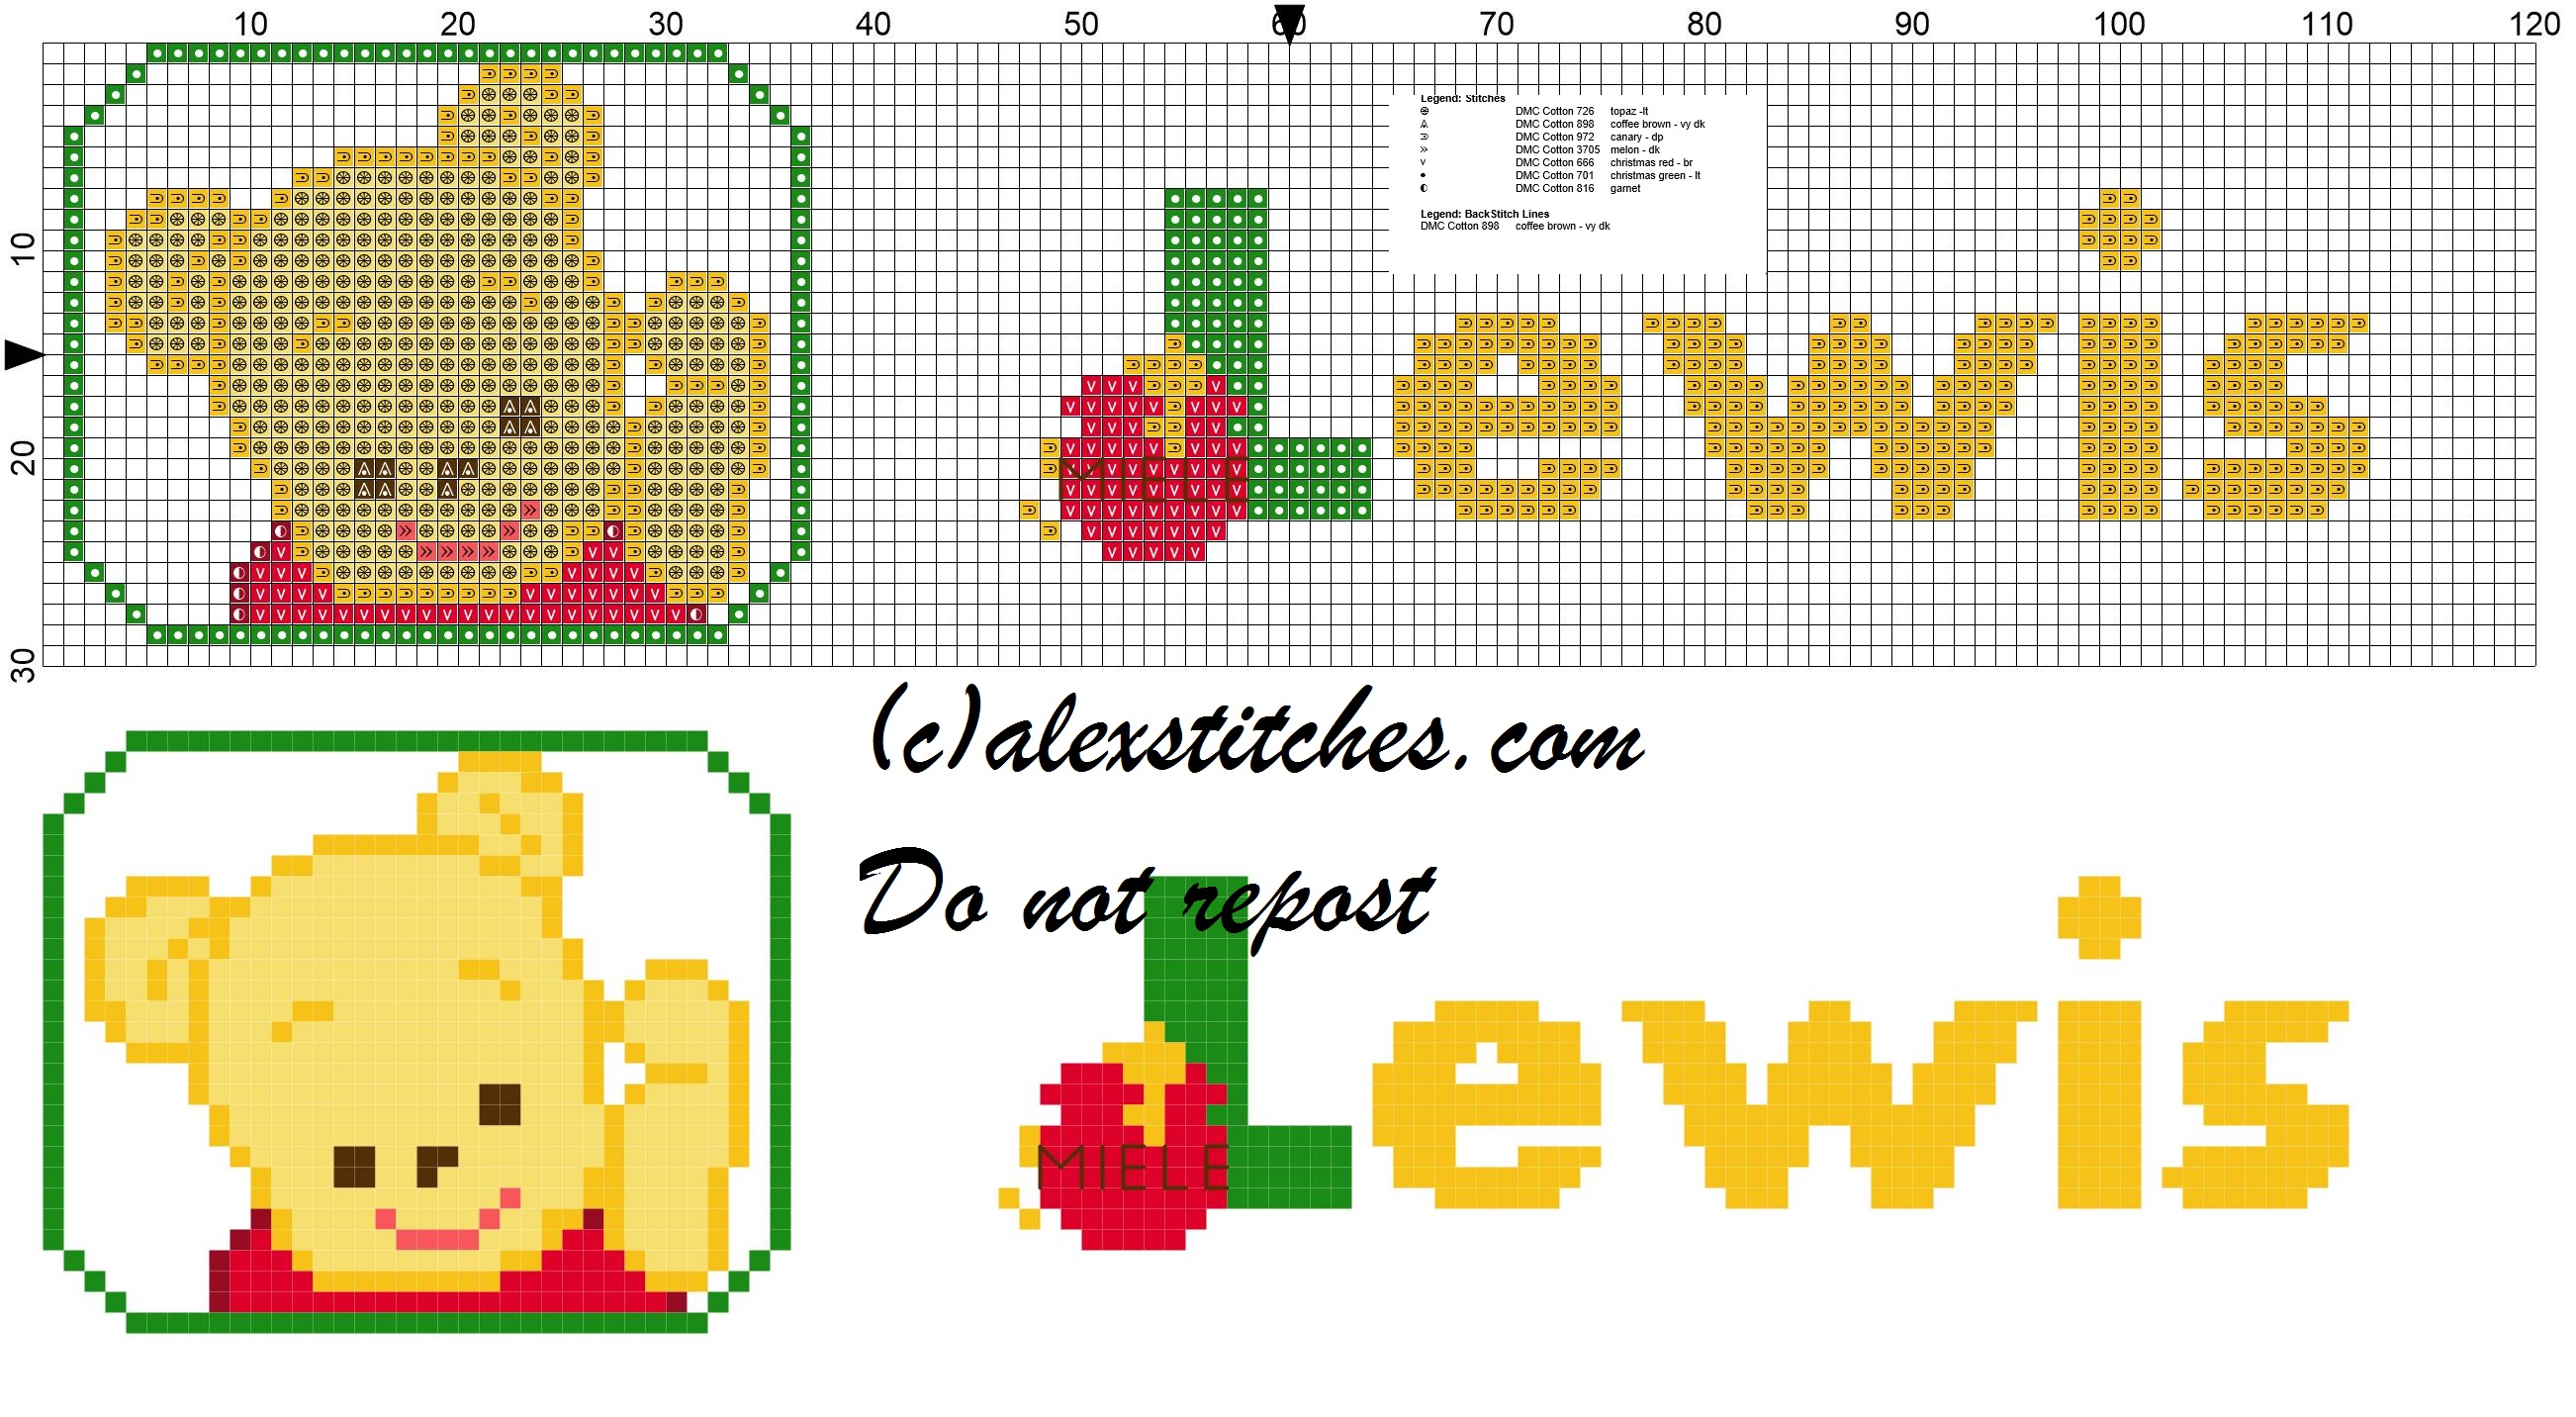 Lewis name with Baby winnie the pooh free cross stitches pattern